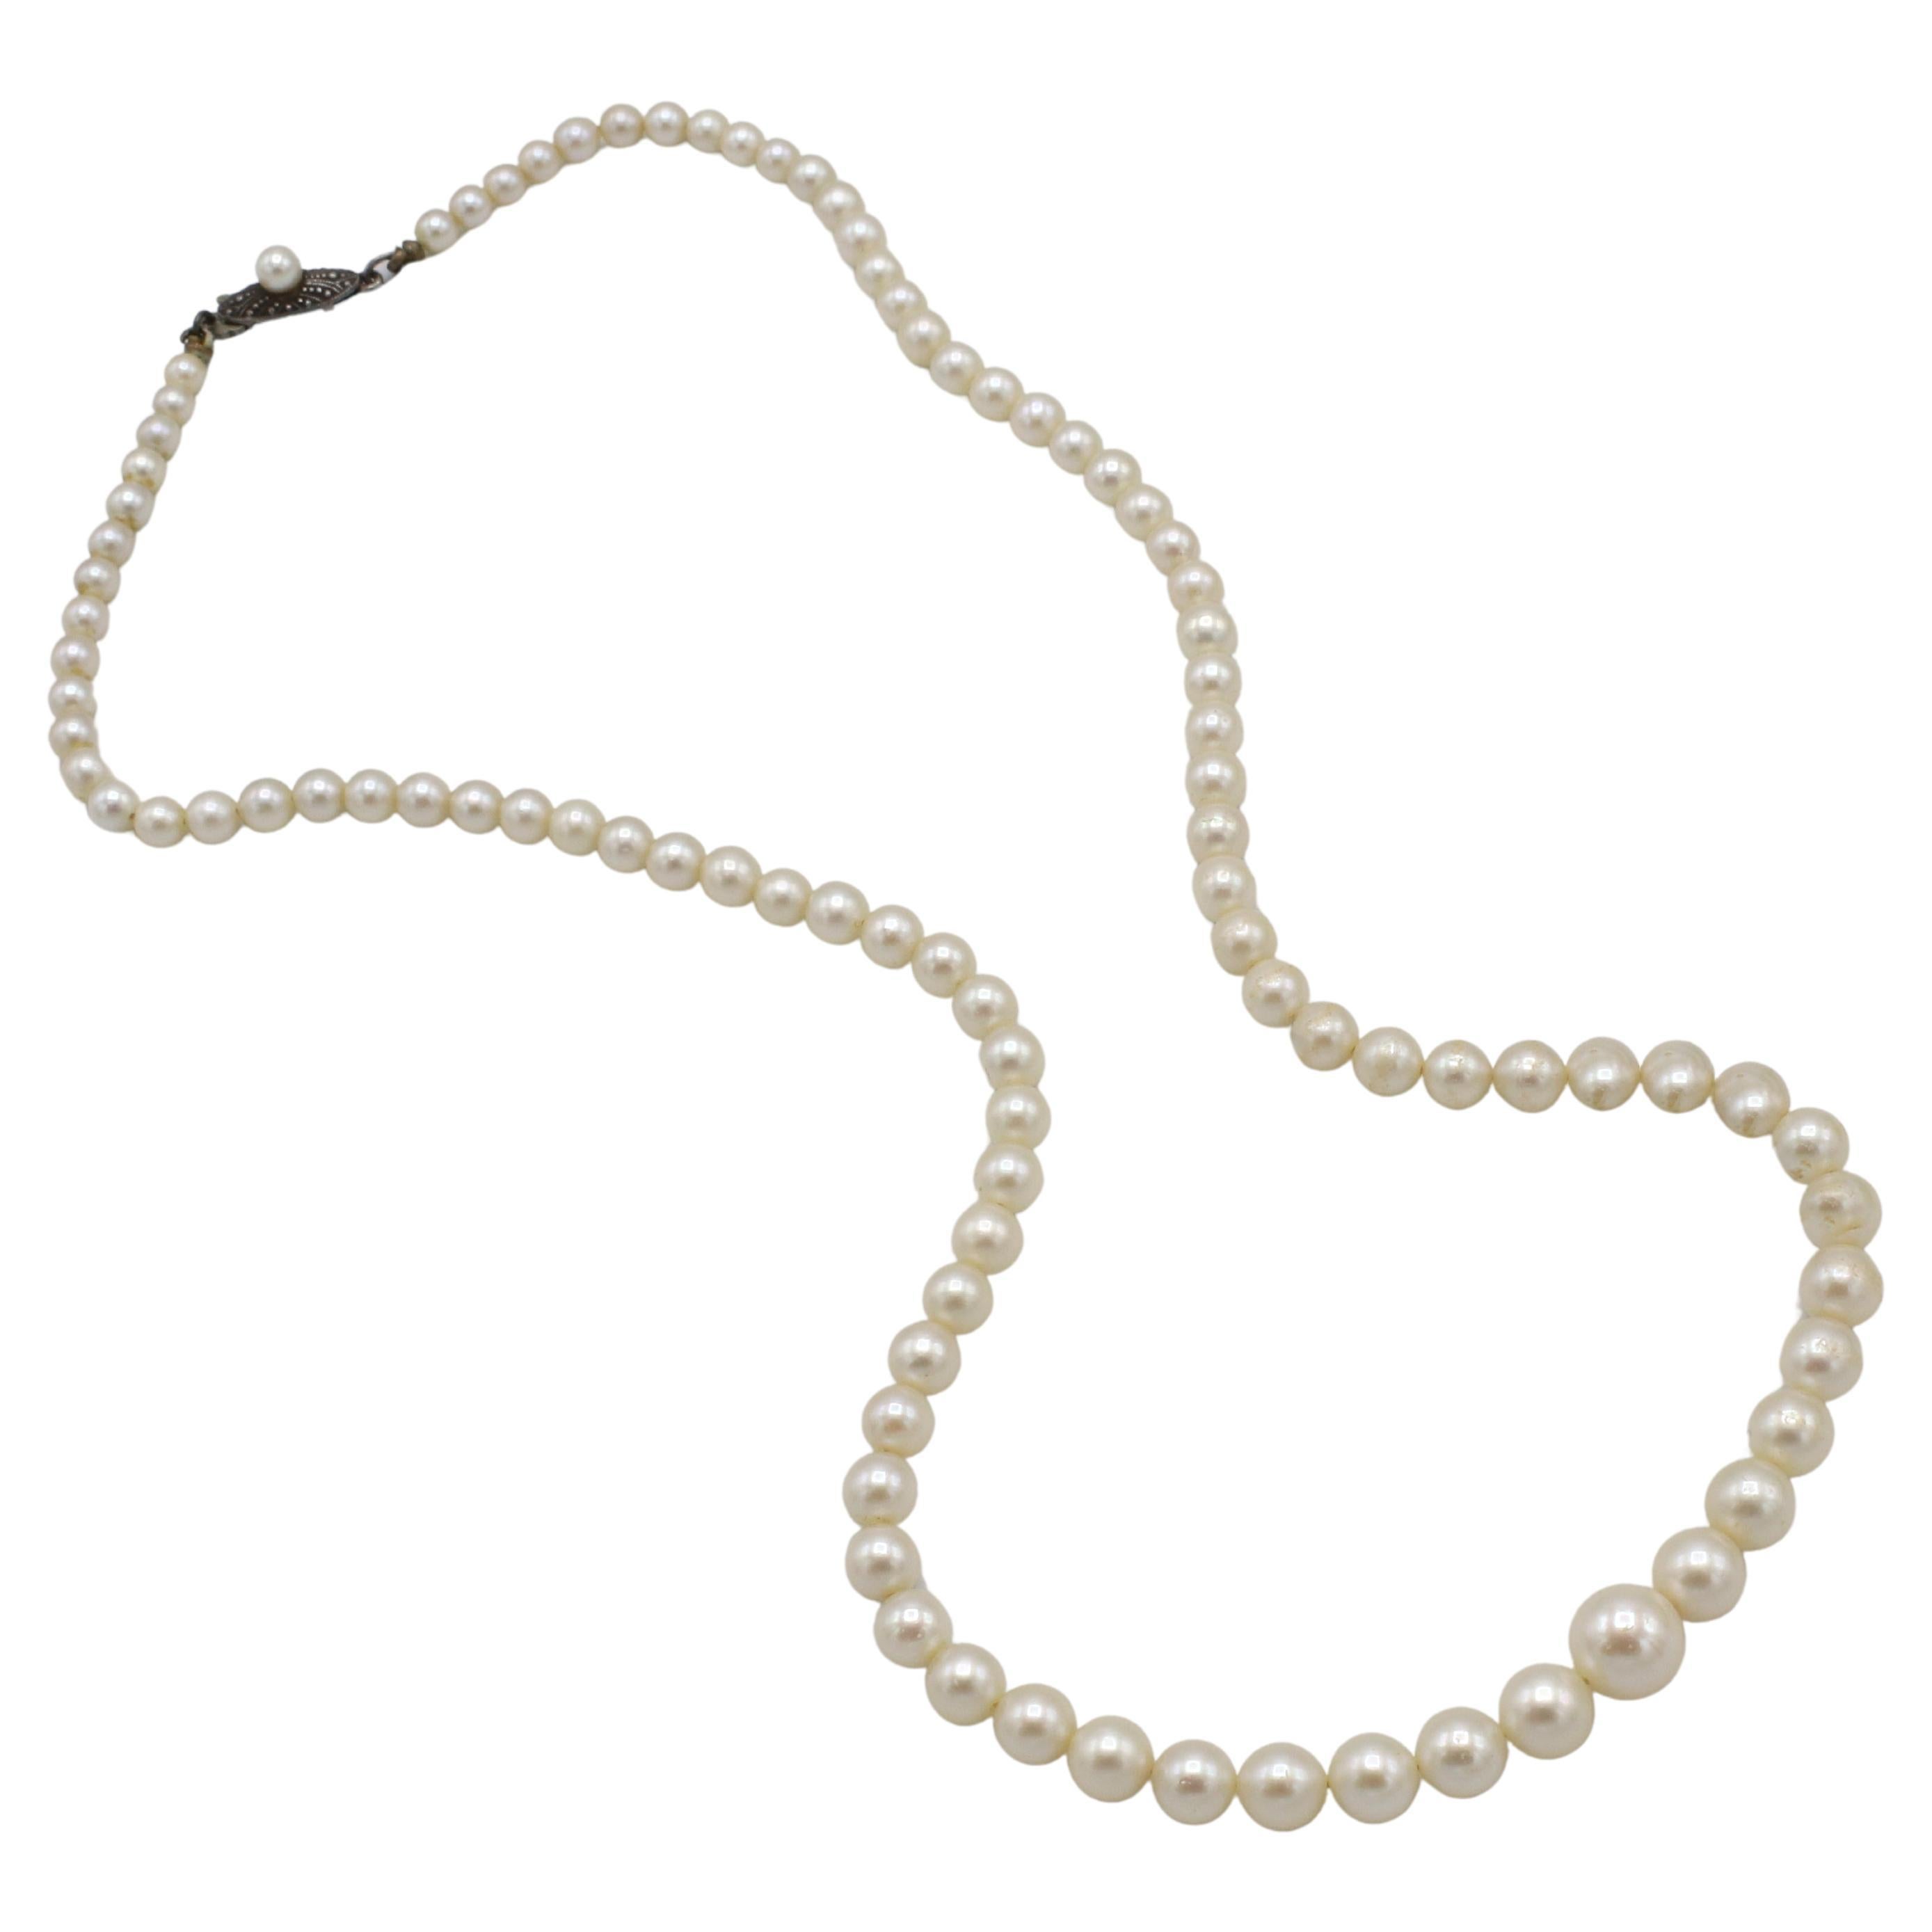 Retro Mikimoto Vintage Cultured Pearl Graduated Necklace Sterling Silver Clasp